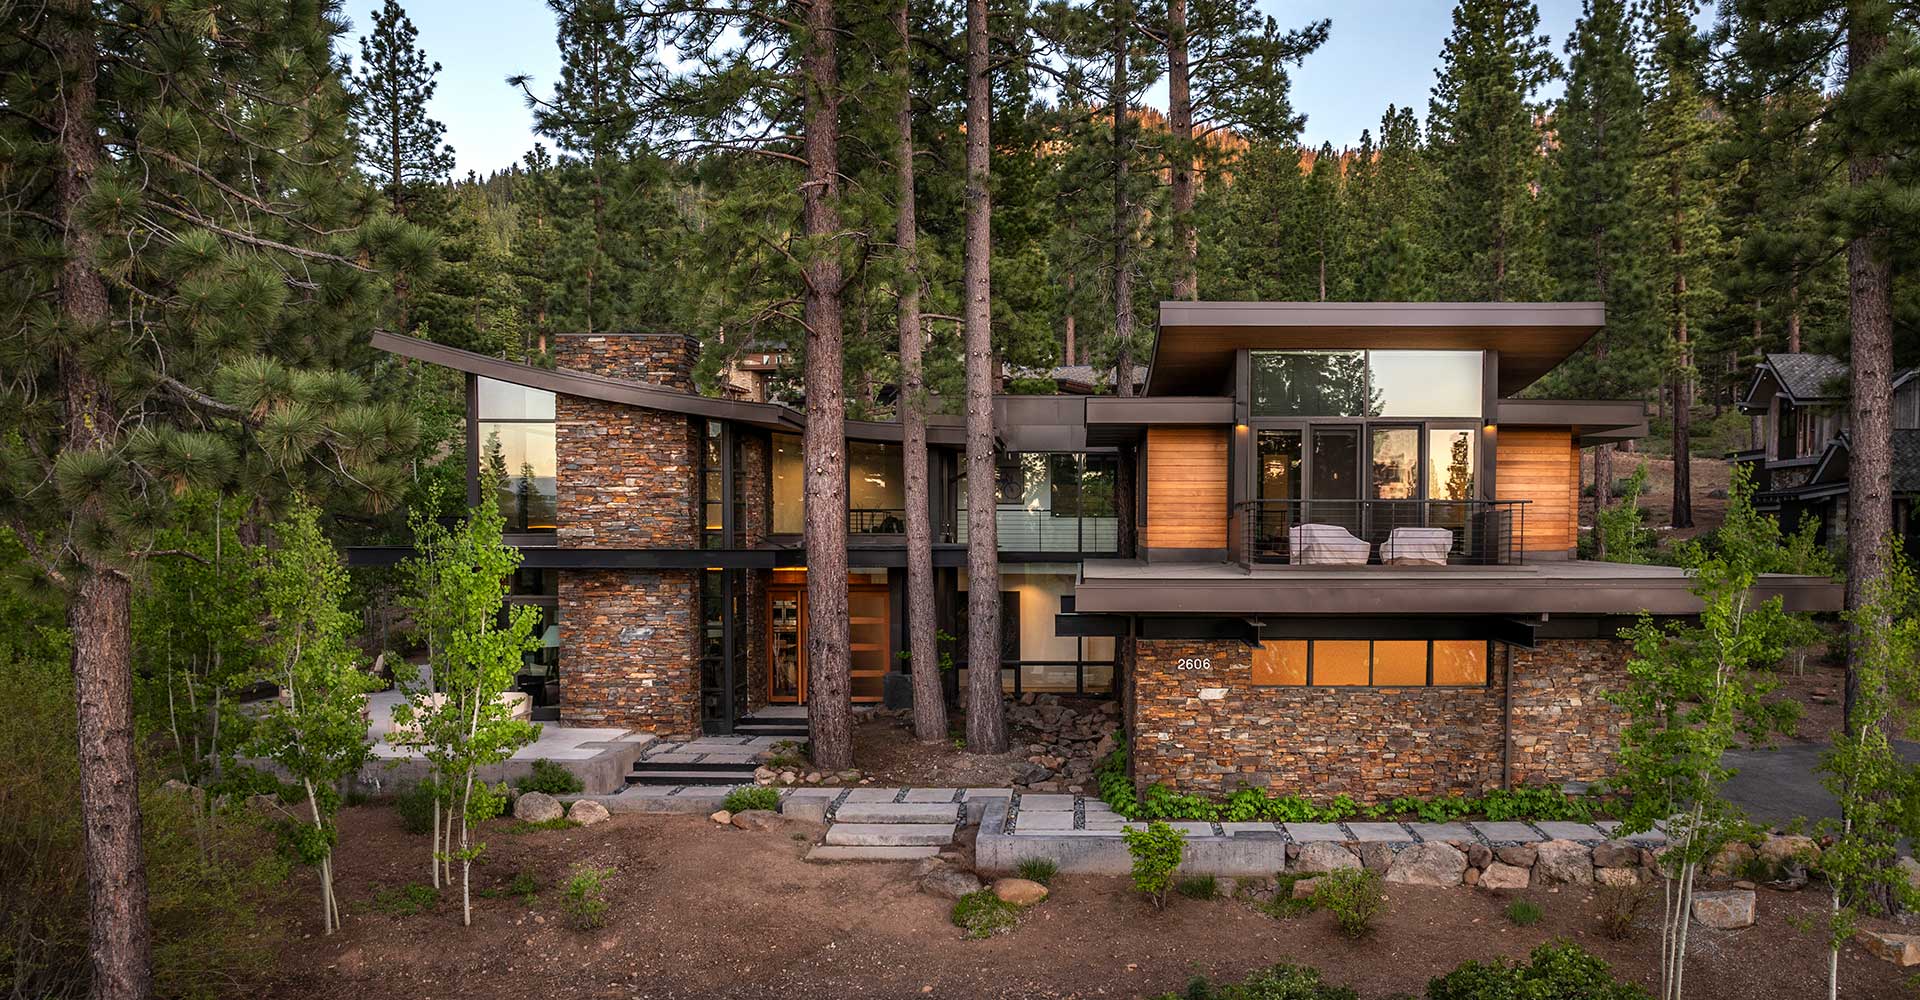 Truckee Luxury homes for sale